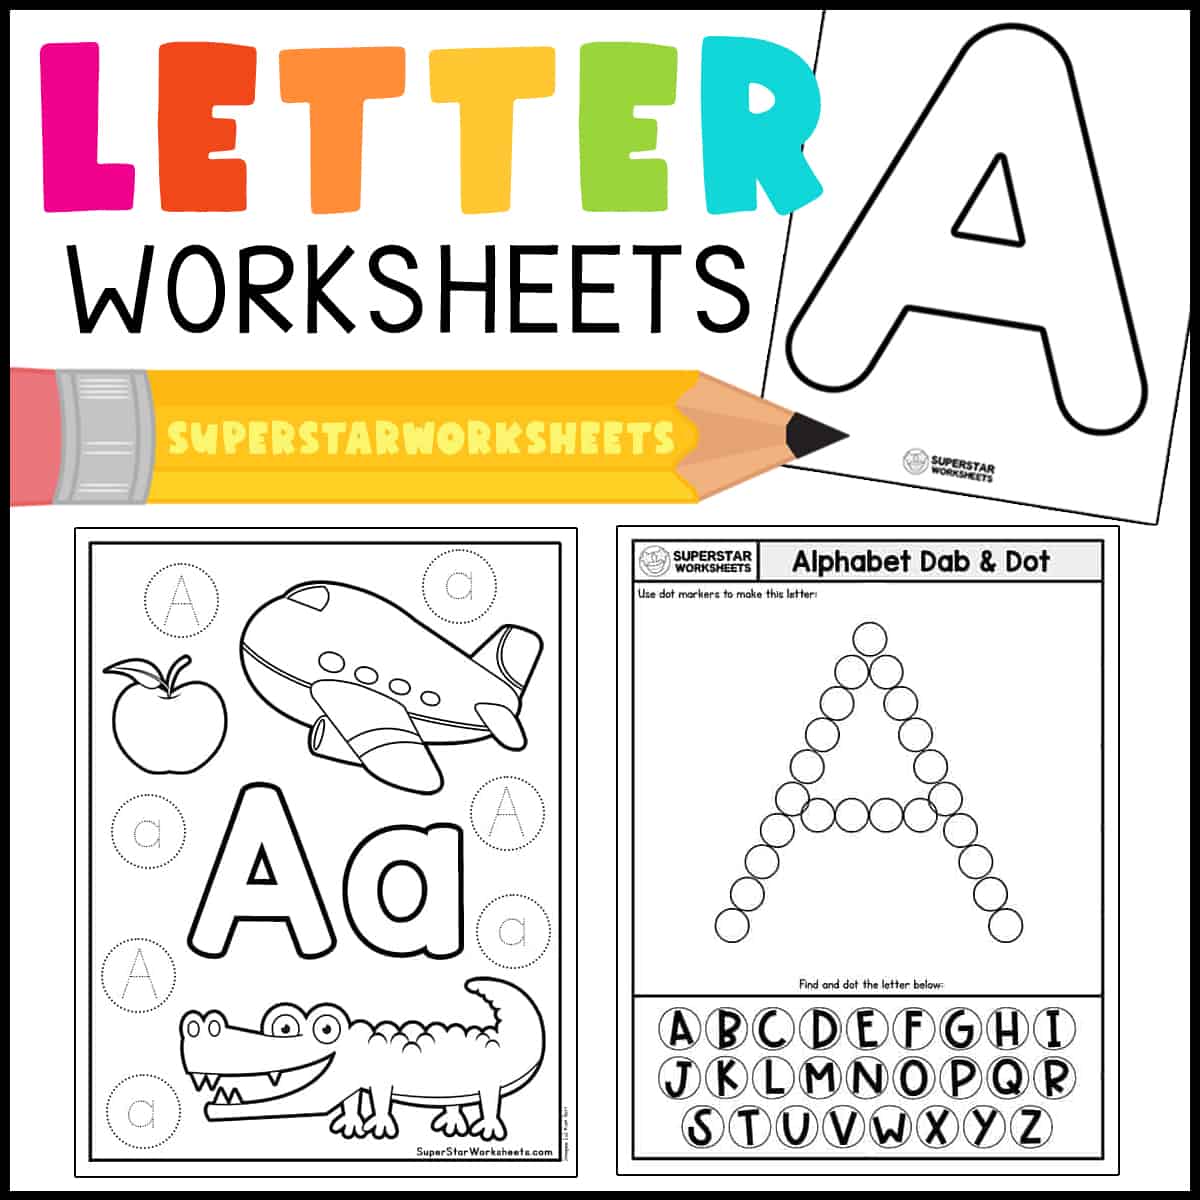 FREE Phonics Letter of the Week B, Back to School Alphabet Worksheets